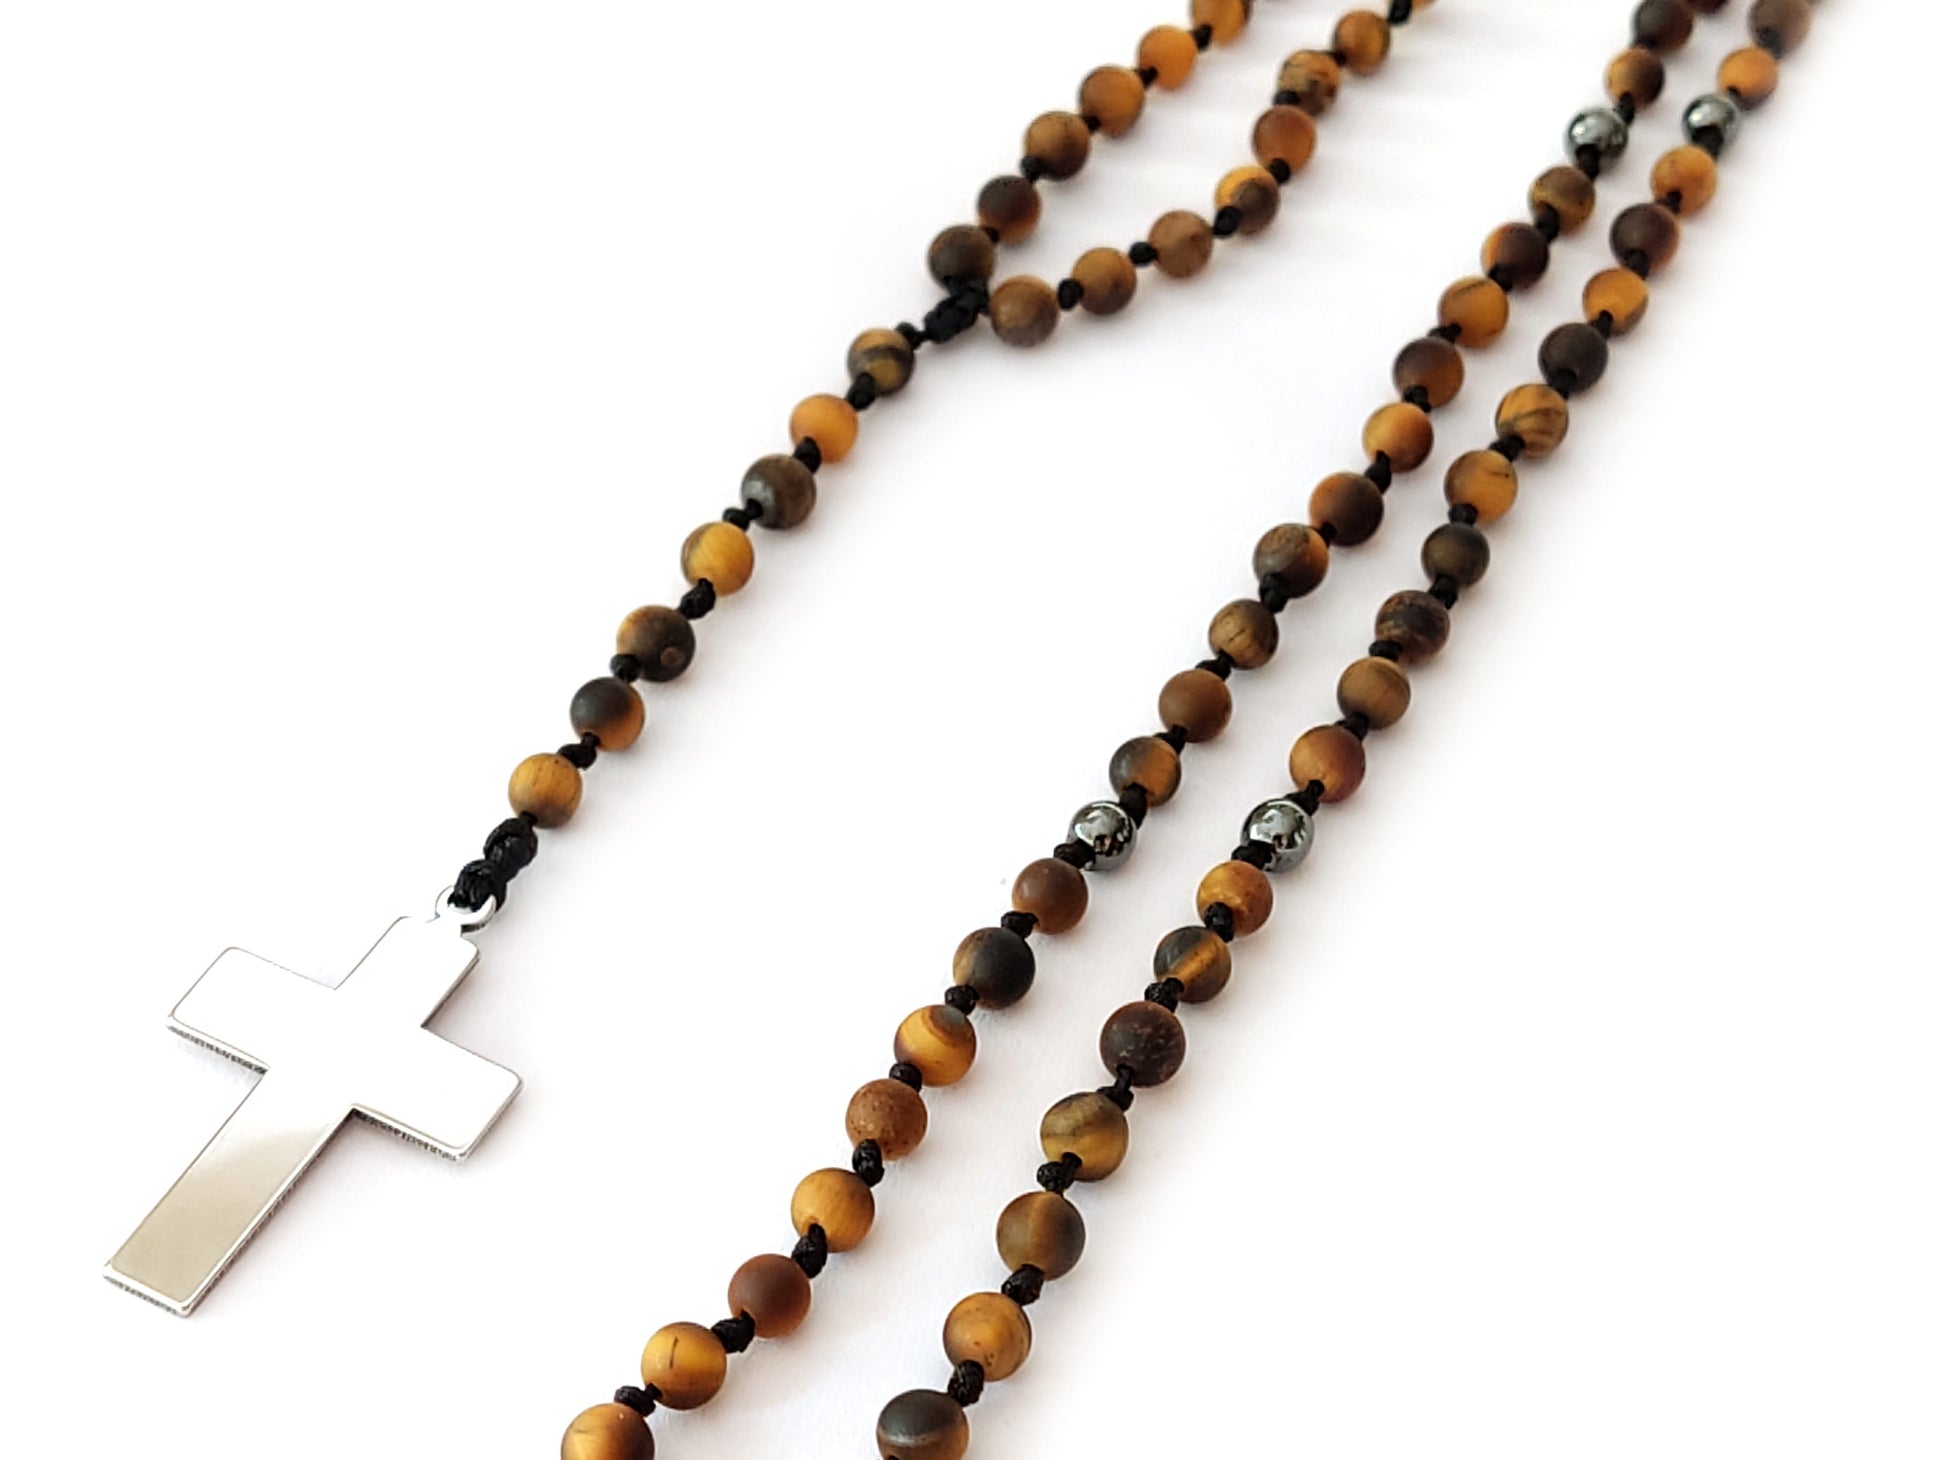 Exquisite Greek Handmade Rosary Necklace featuring Tiger's Eye gemstones.